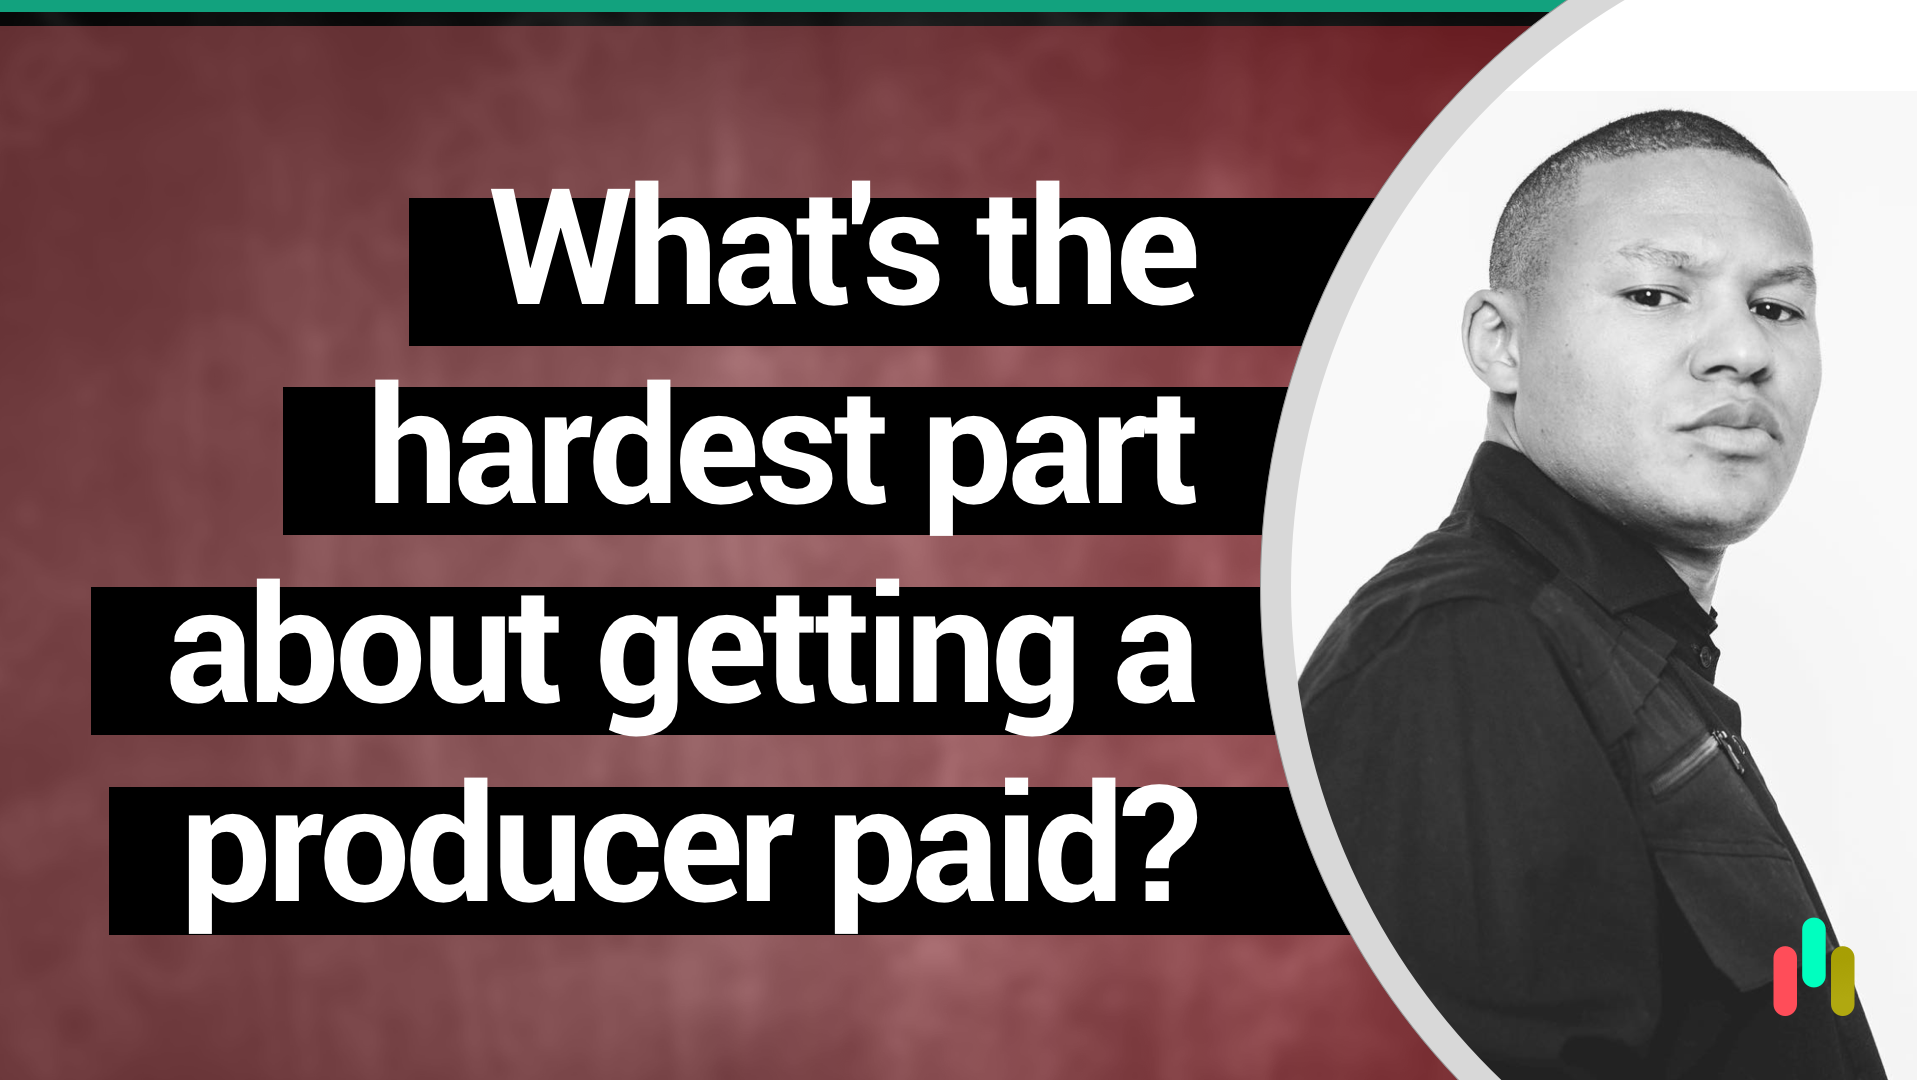 Manager, entrepreneur, and @themelodyapp Co-Founder/Head of Business Development & Marketing @loot_music_group answers the question: “What’s the hardest part of getting a producer paid?”🤔💰